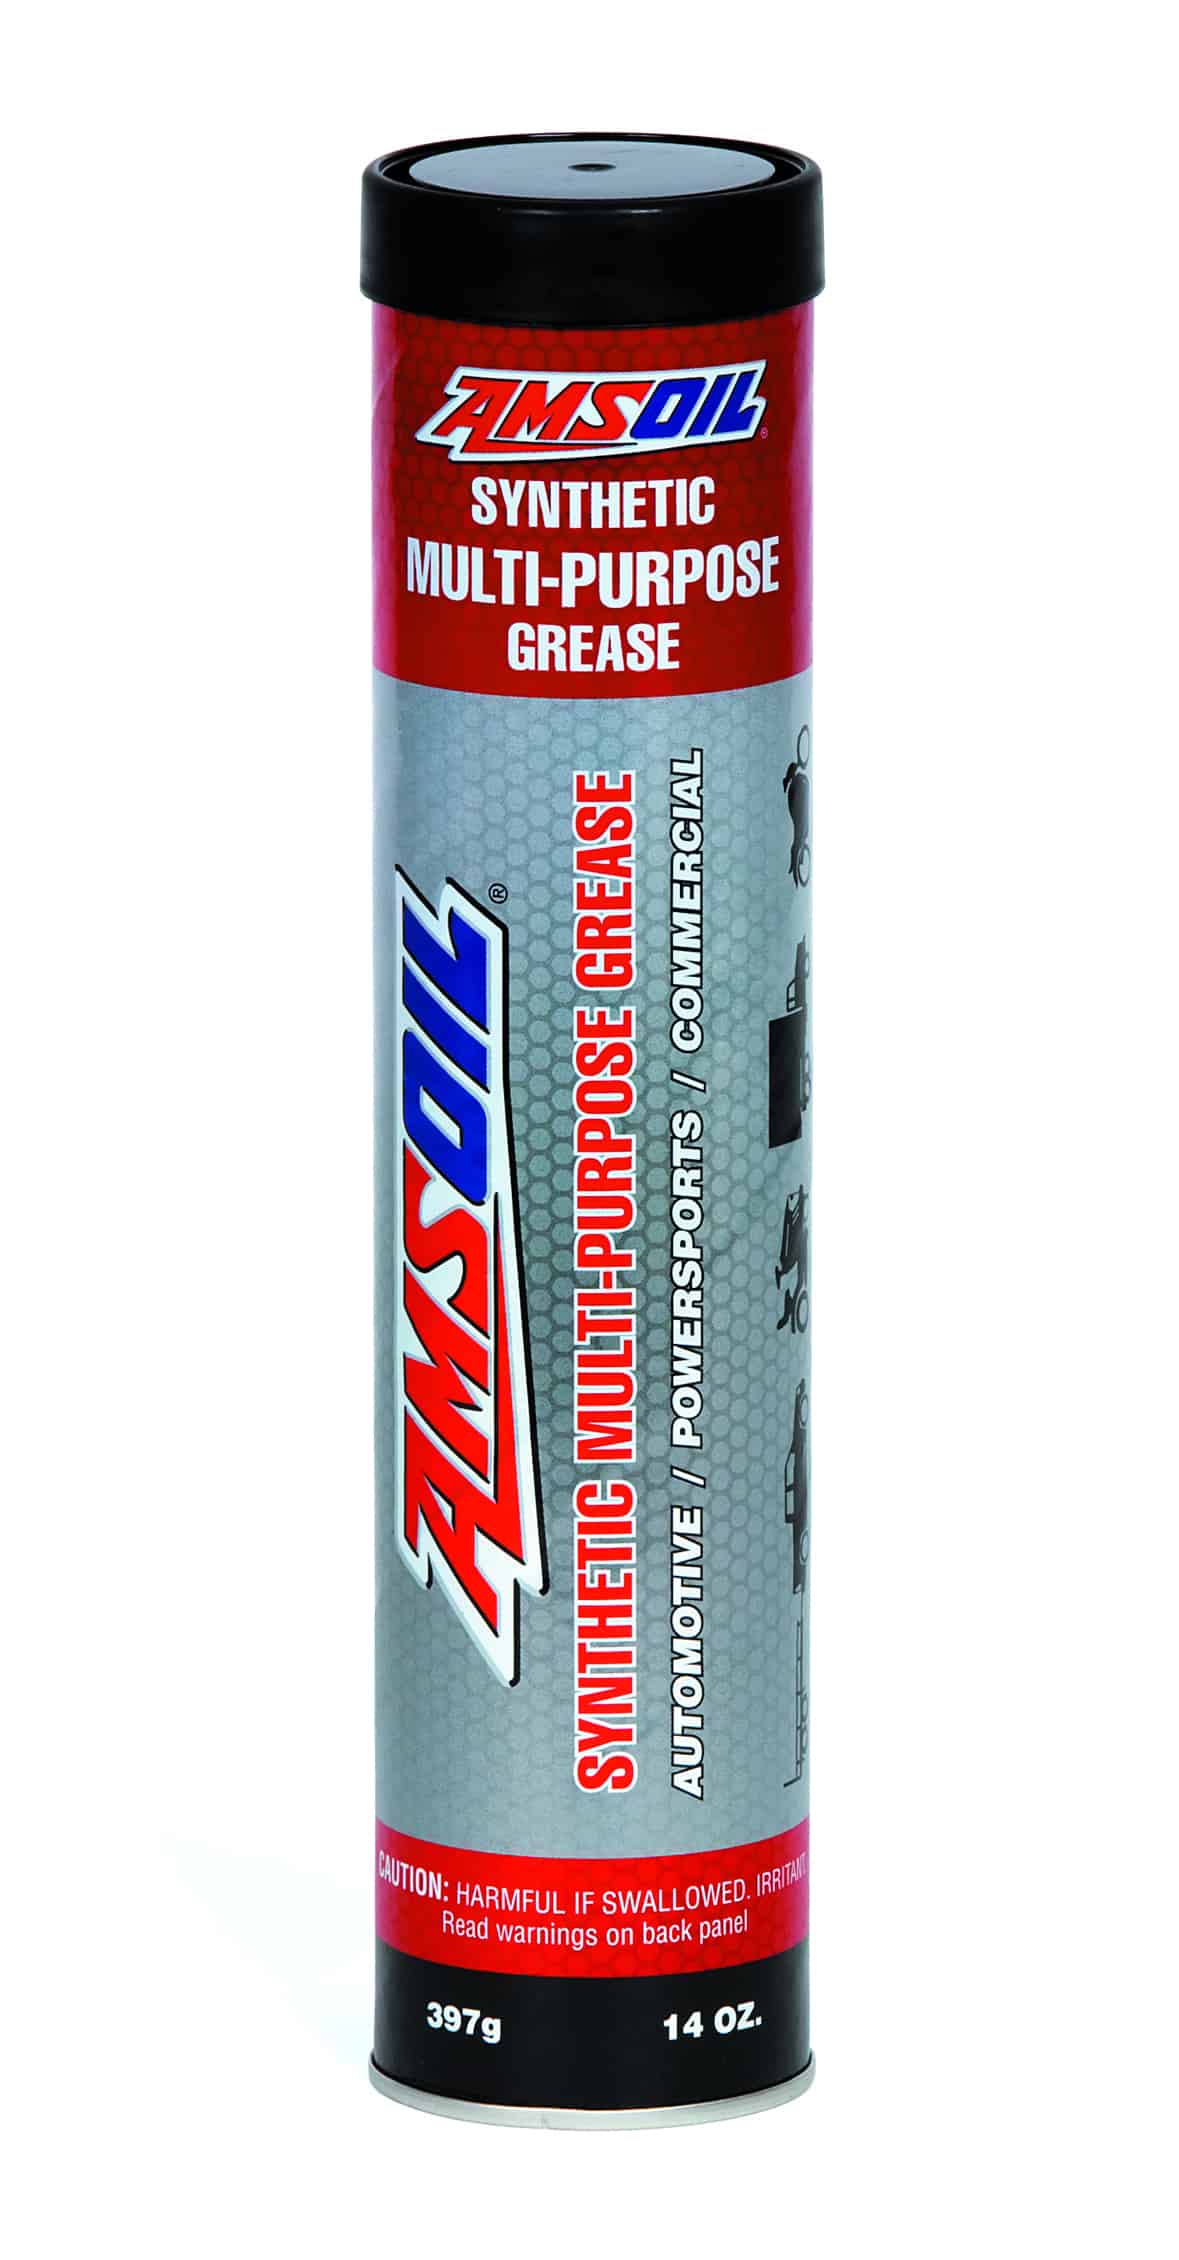 A cartridge of AMSOIL Synthetic Multi-Purpose Grease, designed to effectively reduce friction and wear. It helps components to run smoothly for great performance & long life.